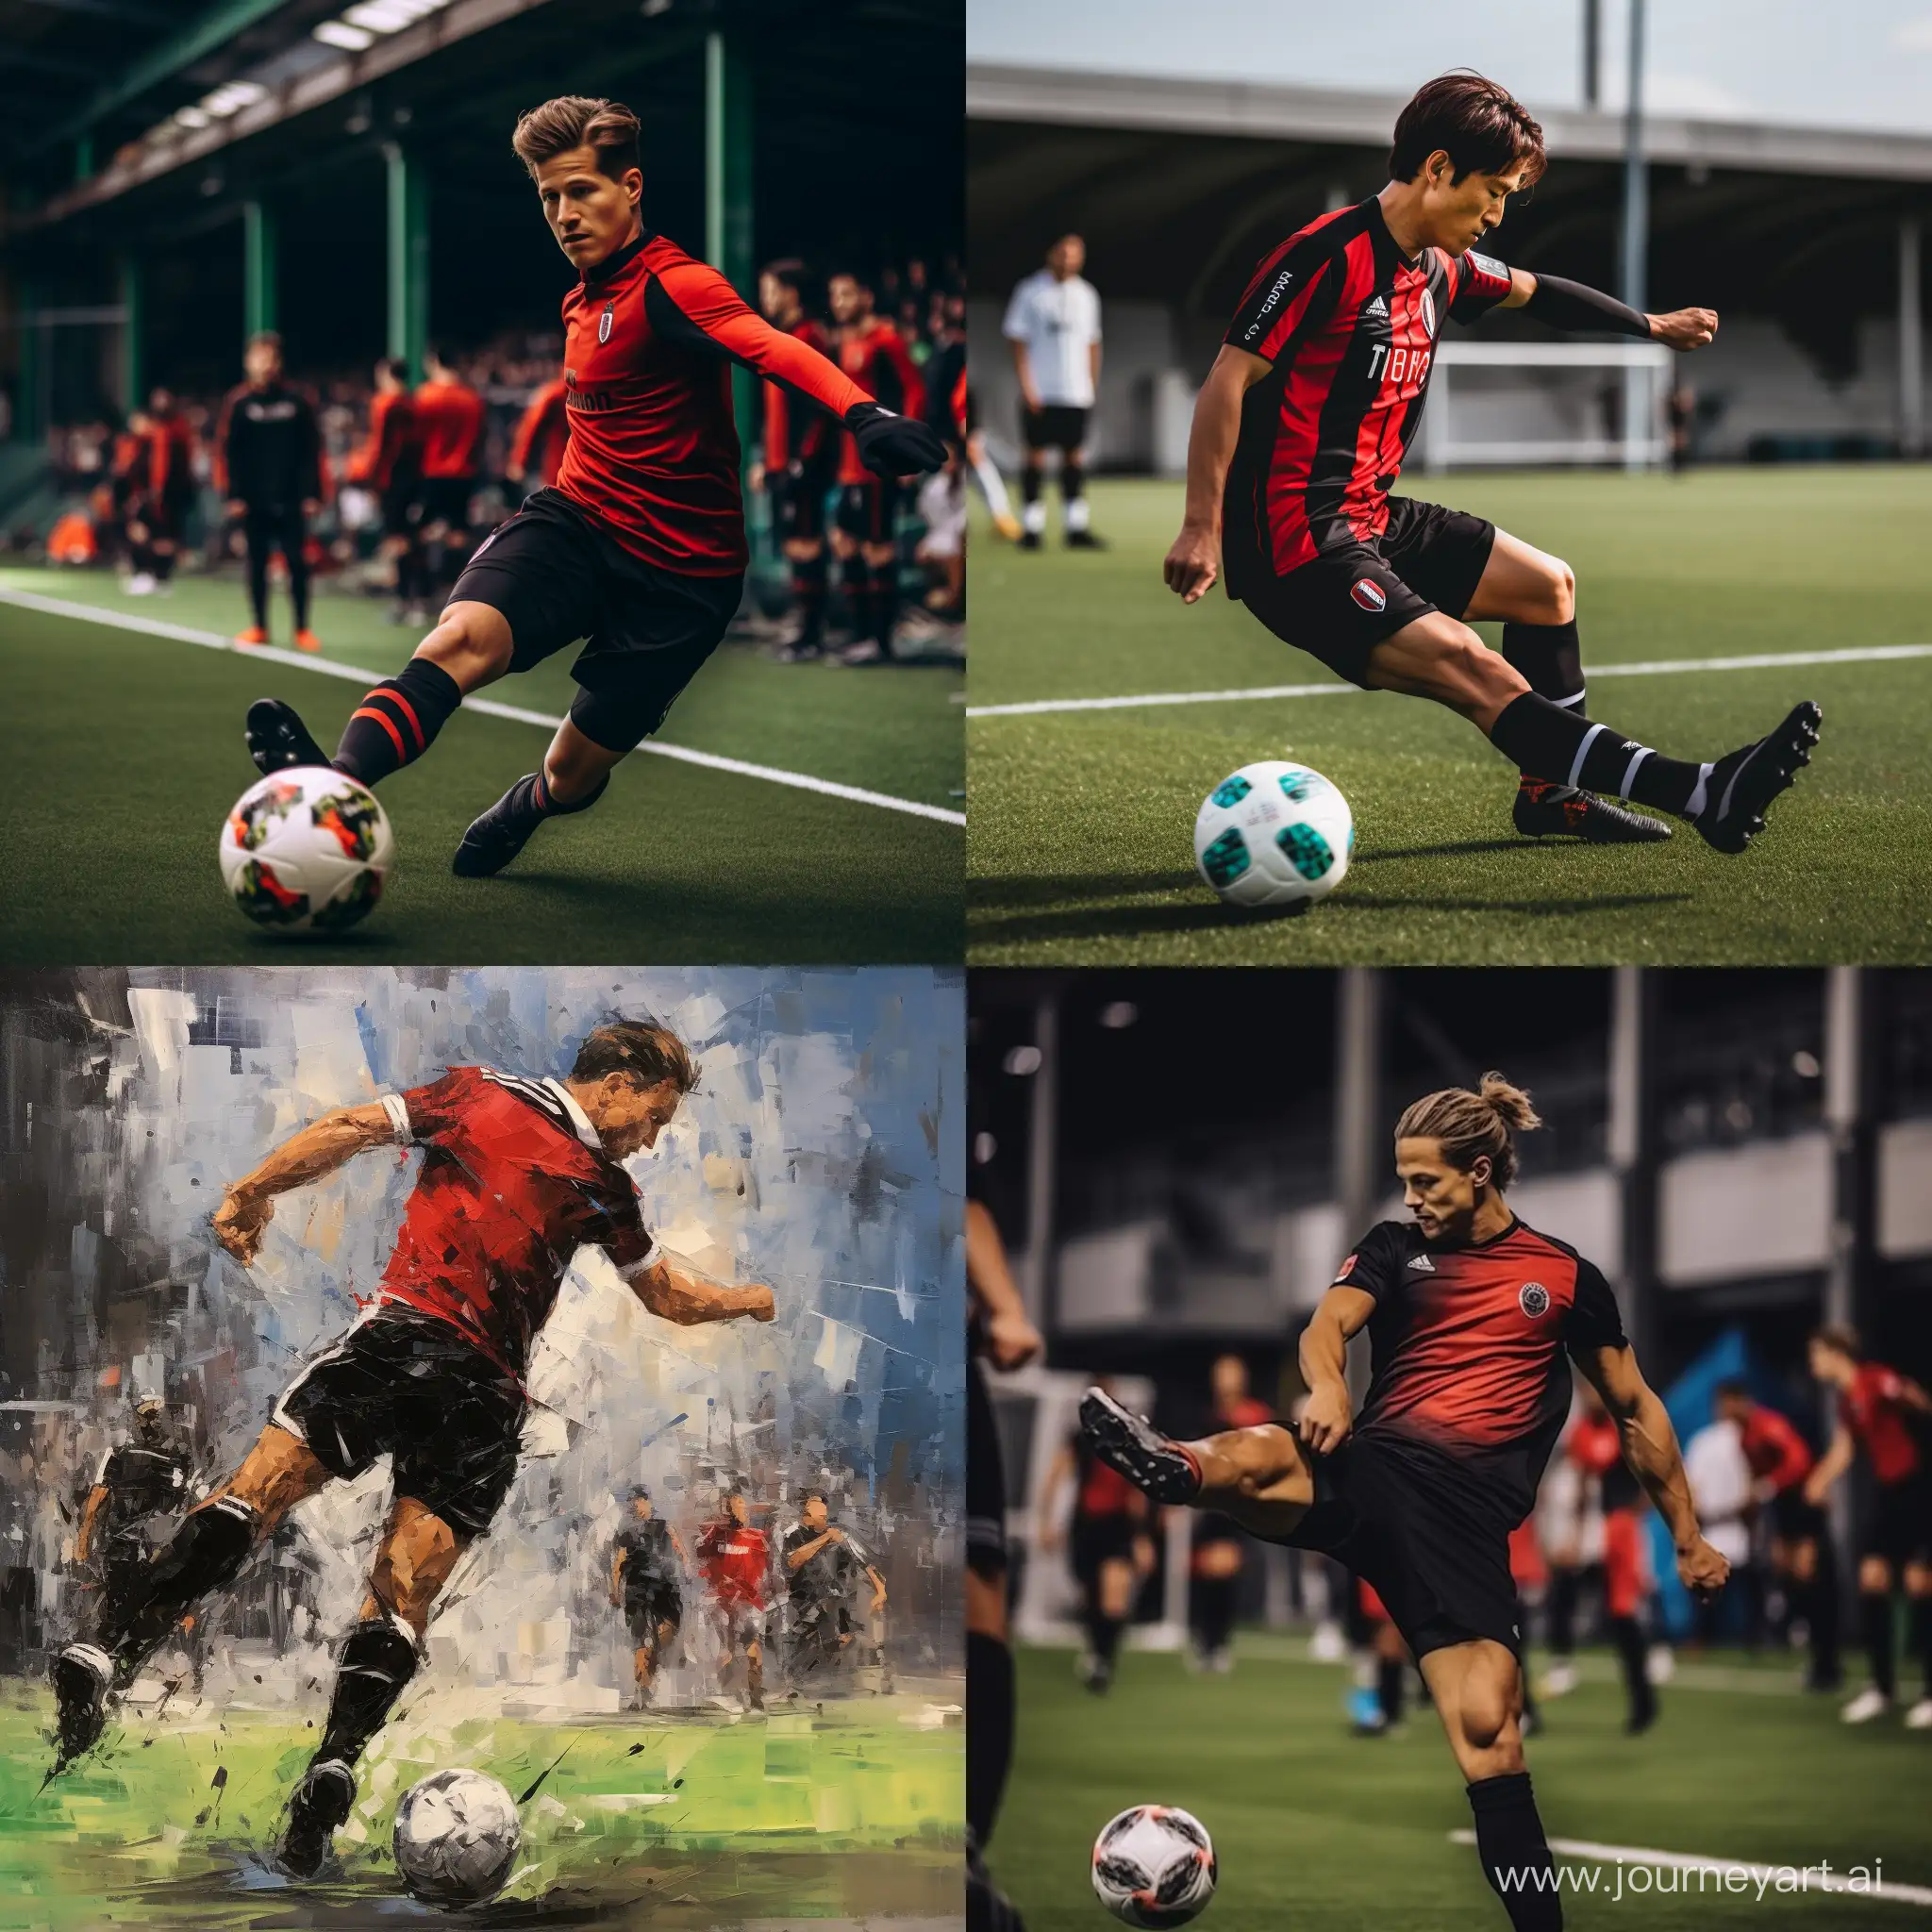 Striking-Goal-in-Red-and-Black-Soccer-Attire-FreeKick-Action